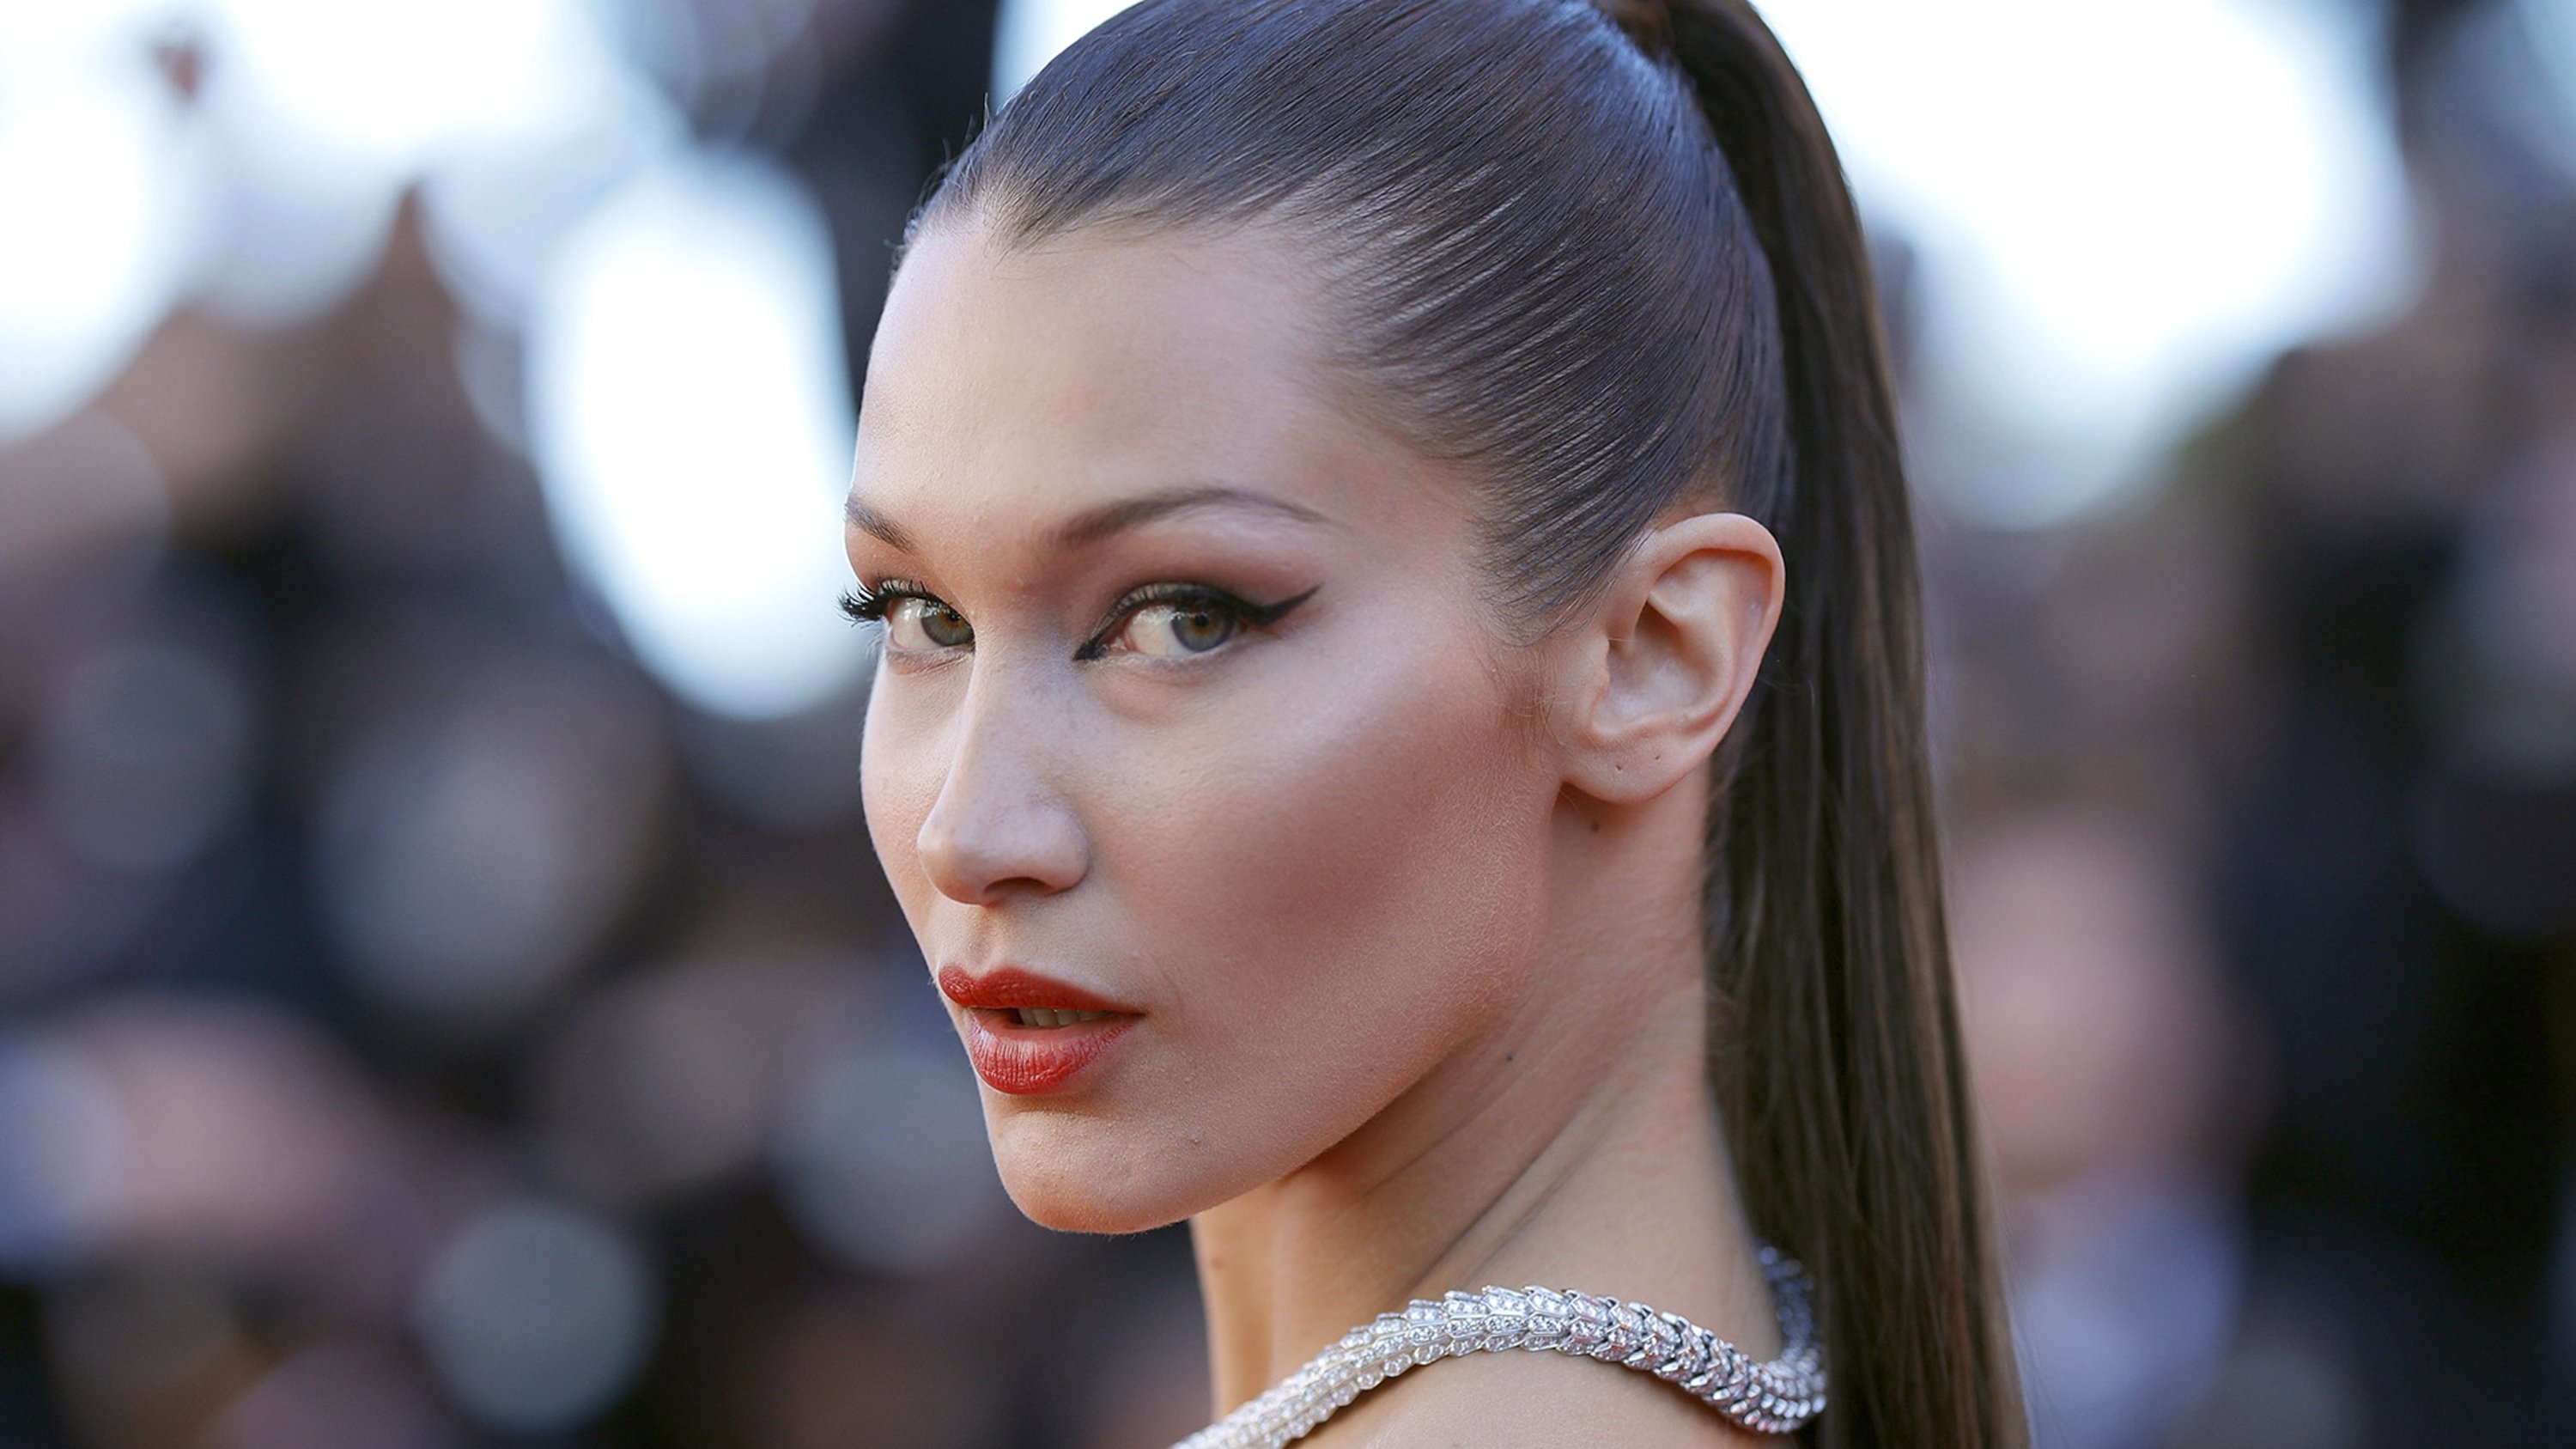 Supermodel Bella Hadid Marches On The Streets Of New York City To Demand  Freedom For Palestine